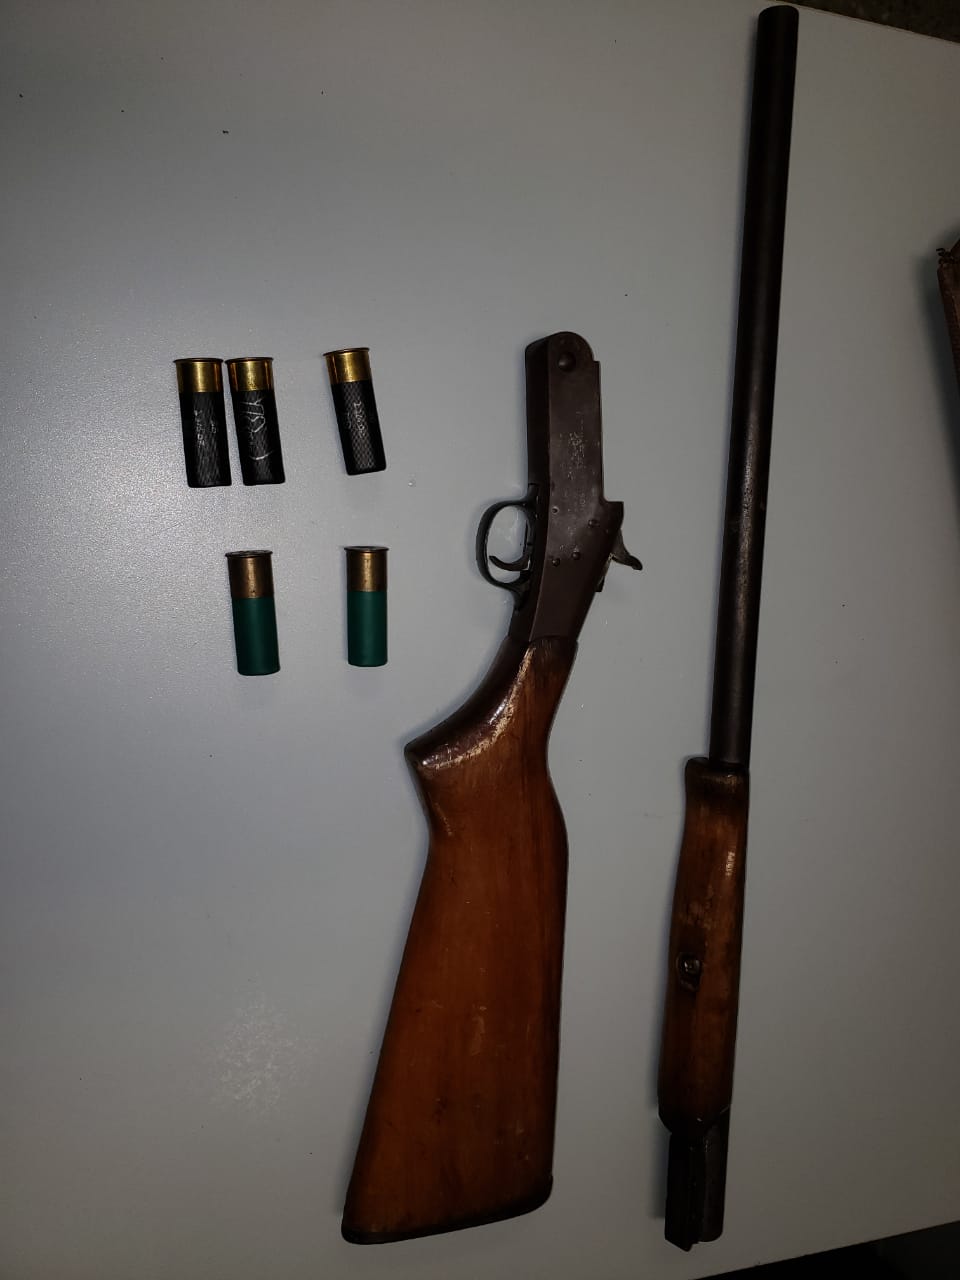 60- year-old man was arrested for the possession of firearms and ammo